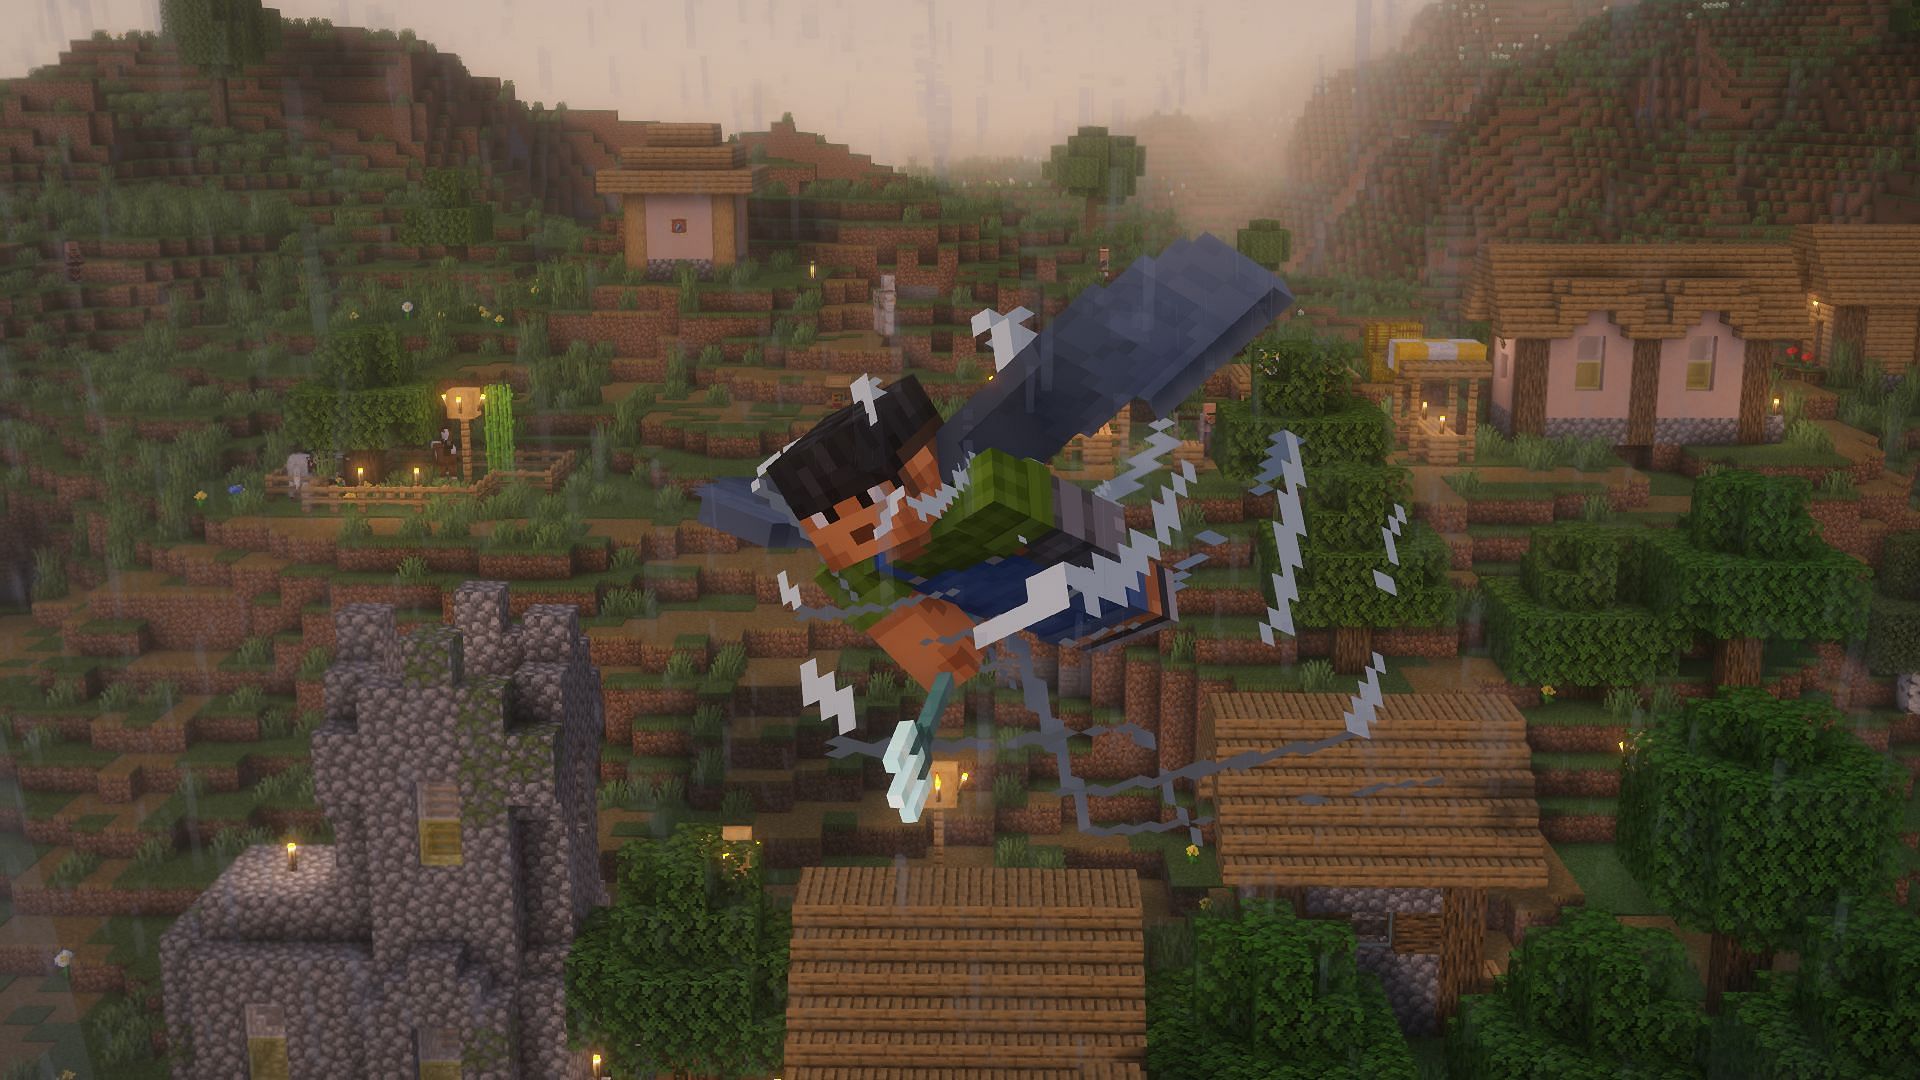 Players using a trident with Riptide to propel themselves (Image via Mojang)